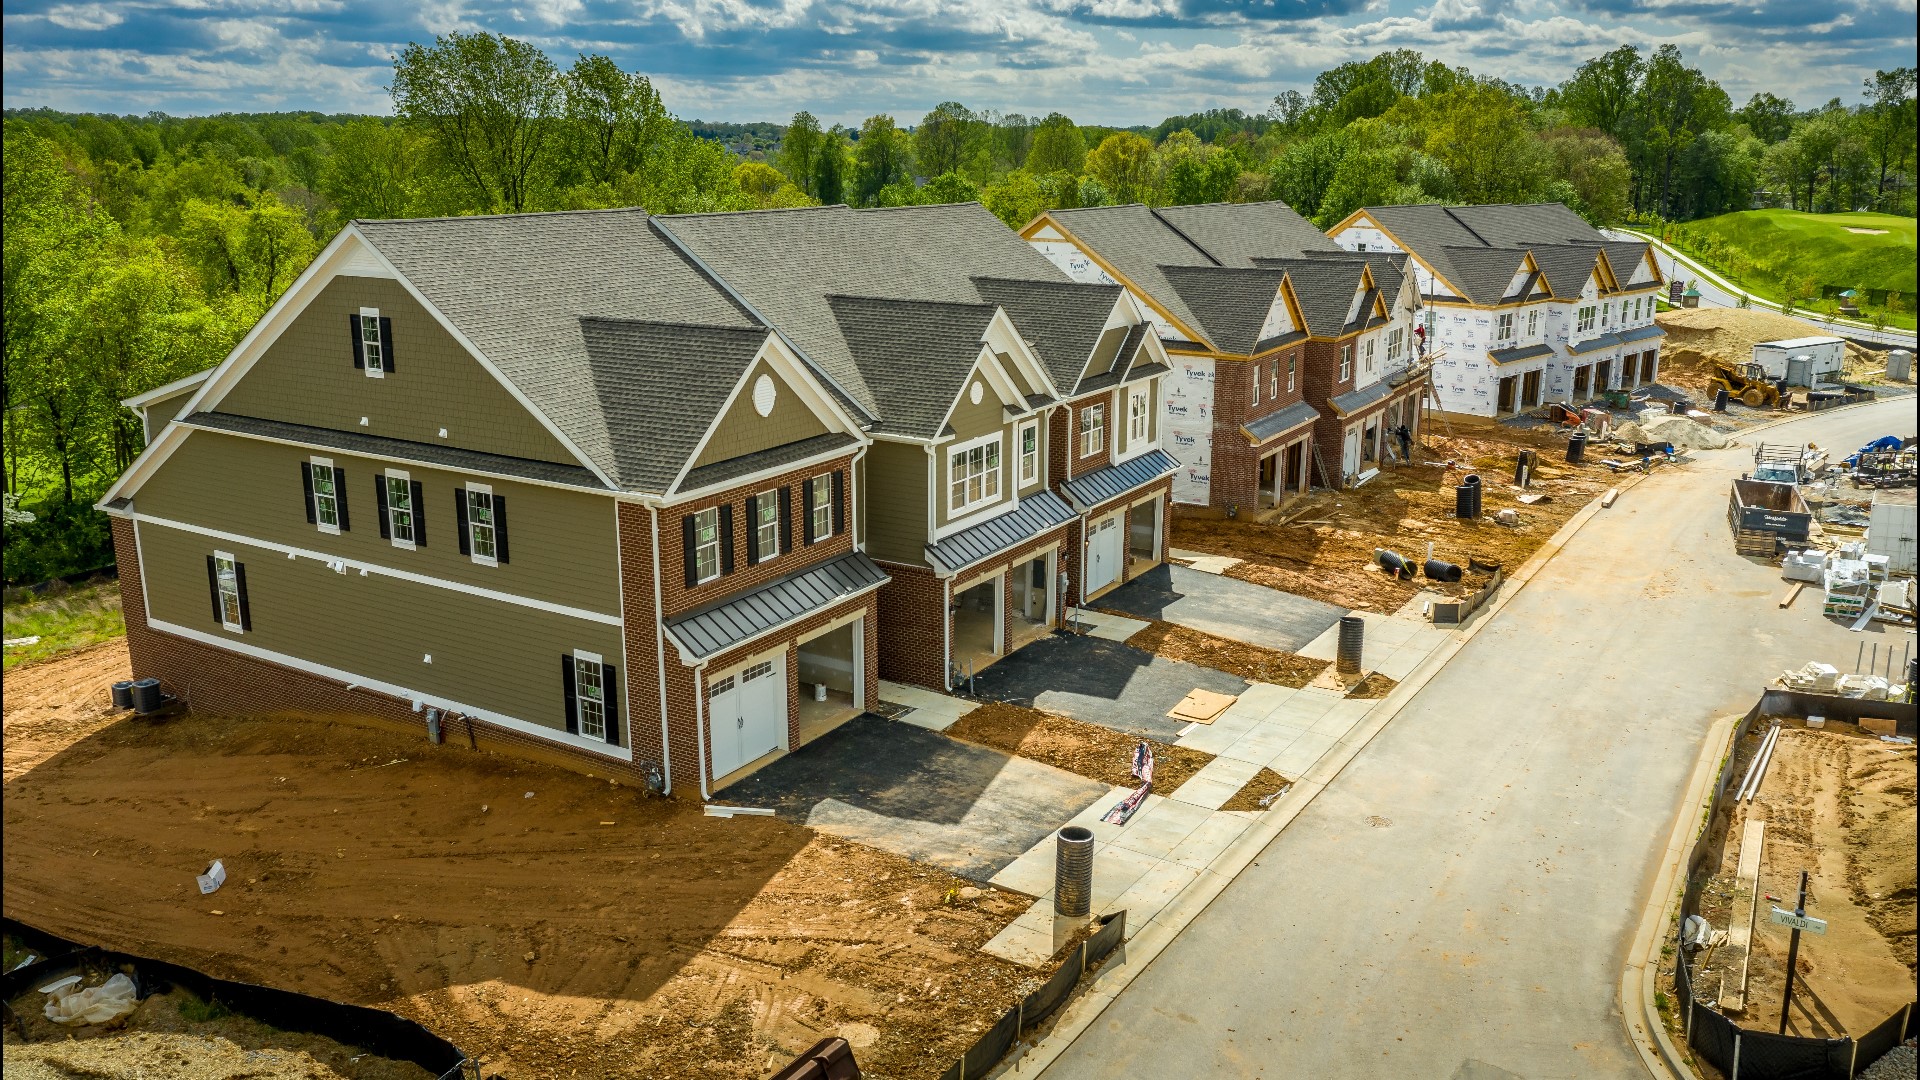 Sponsored by The Mortgage Link and Eastern Title & Settlement. When home resale inventory is tight, new home construction can be alternative for buyers.